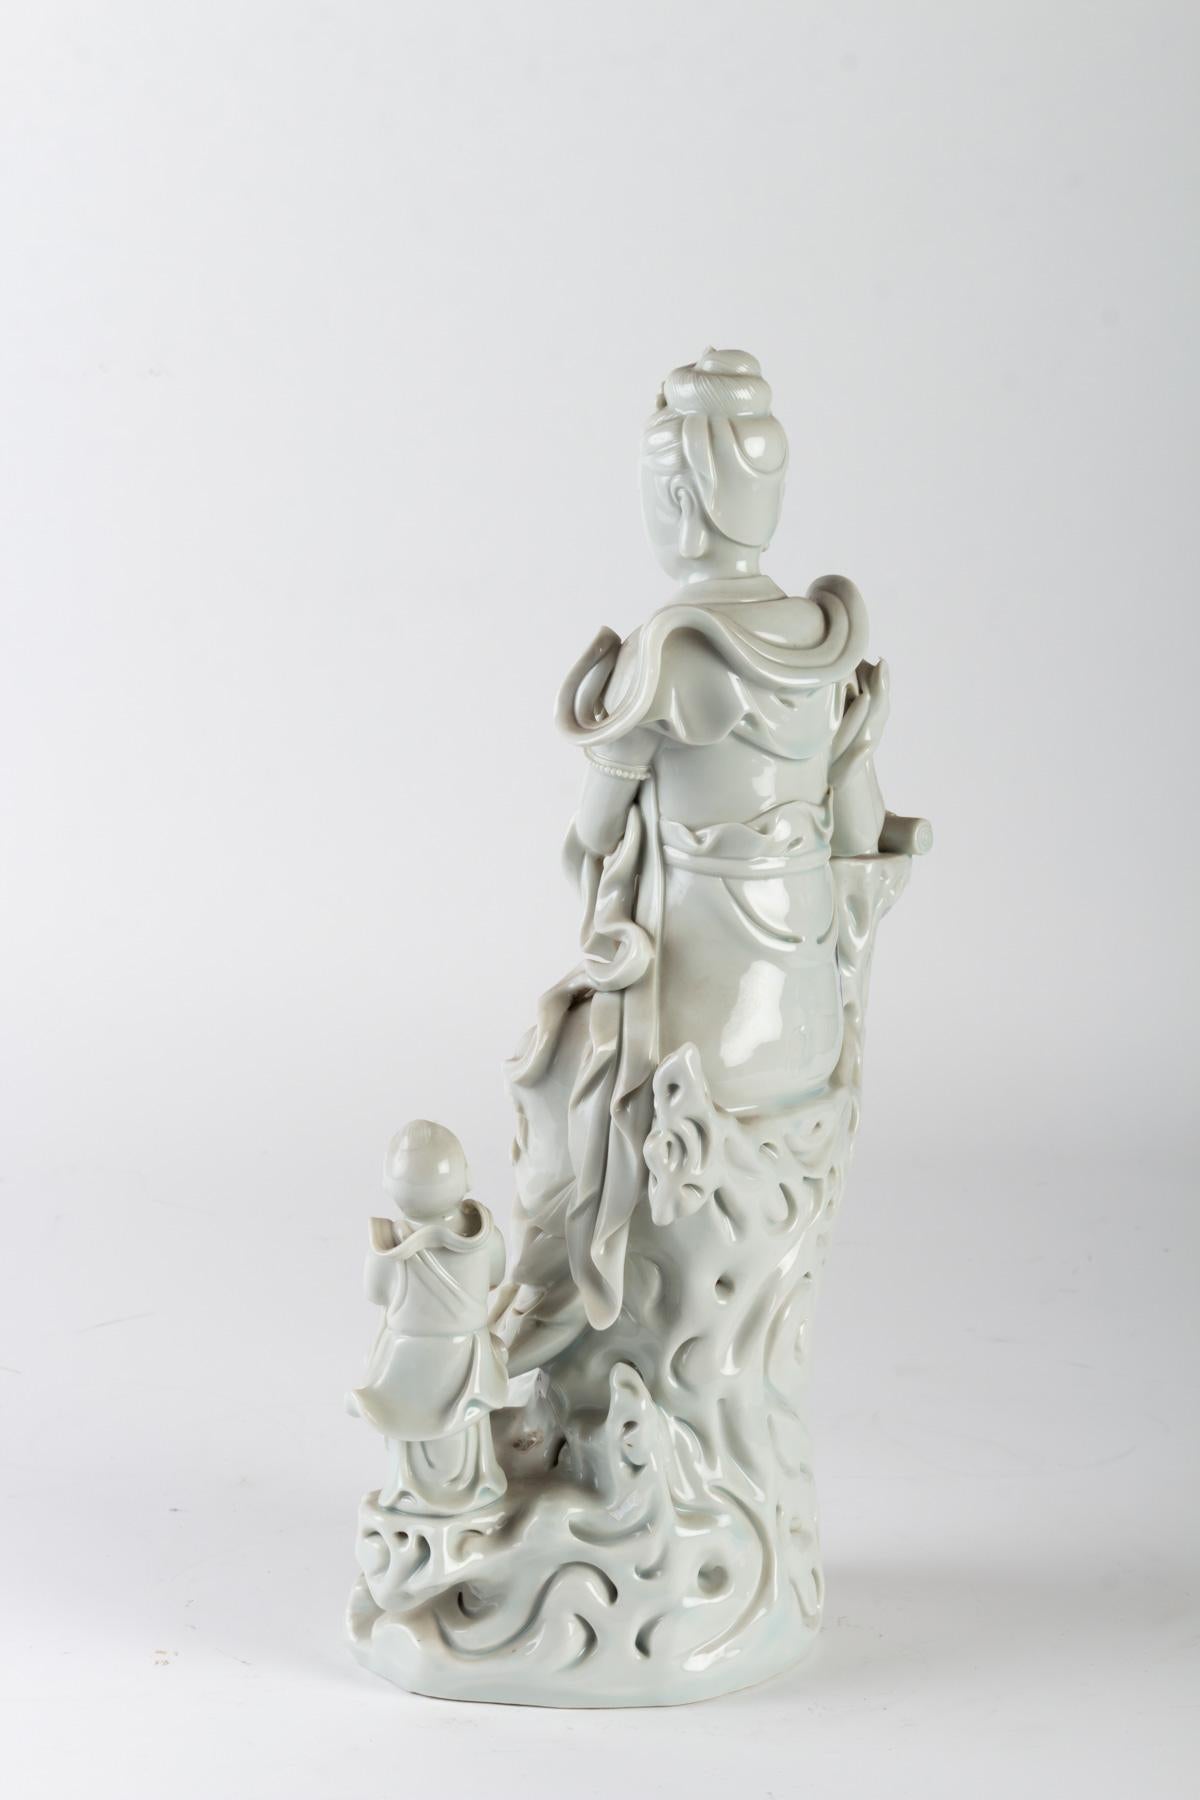 20th Century White Porcelain Statuette of a Divinity and His Child